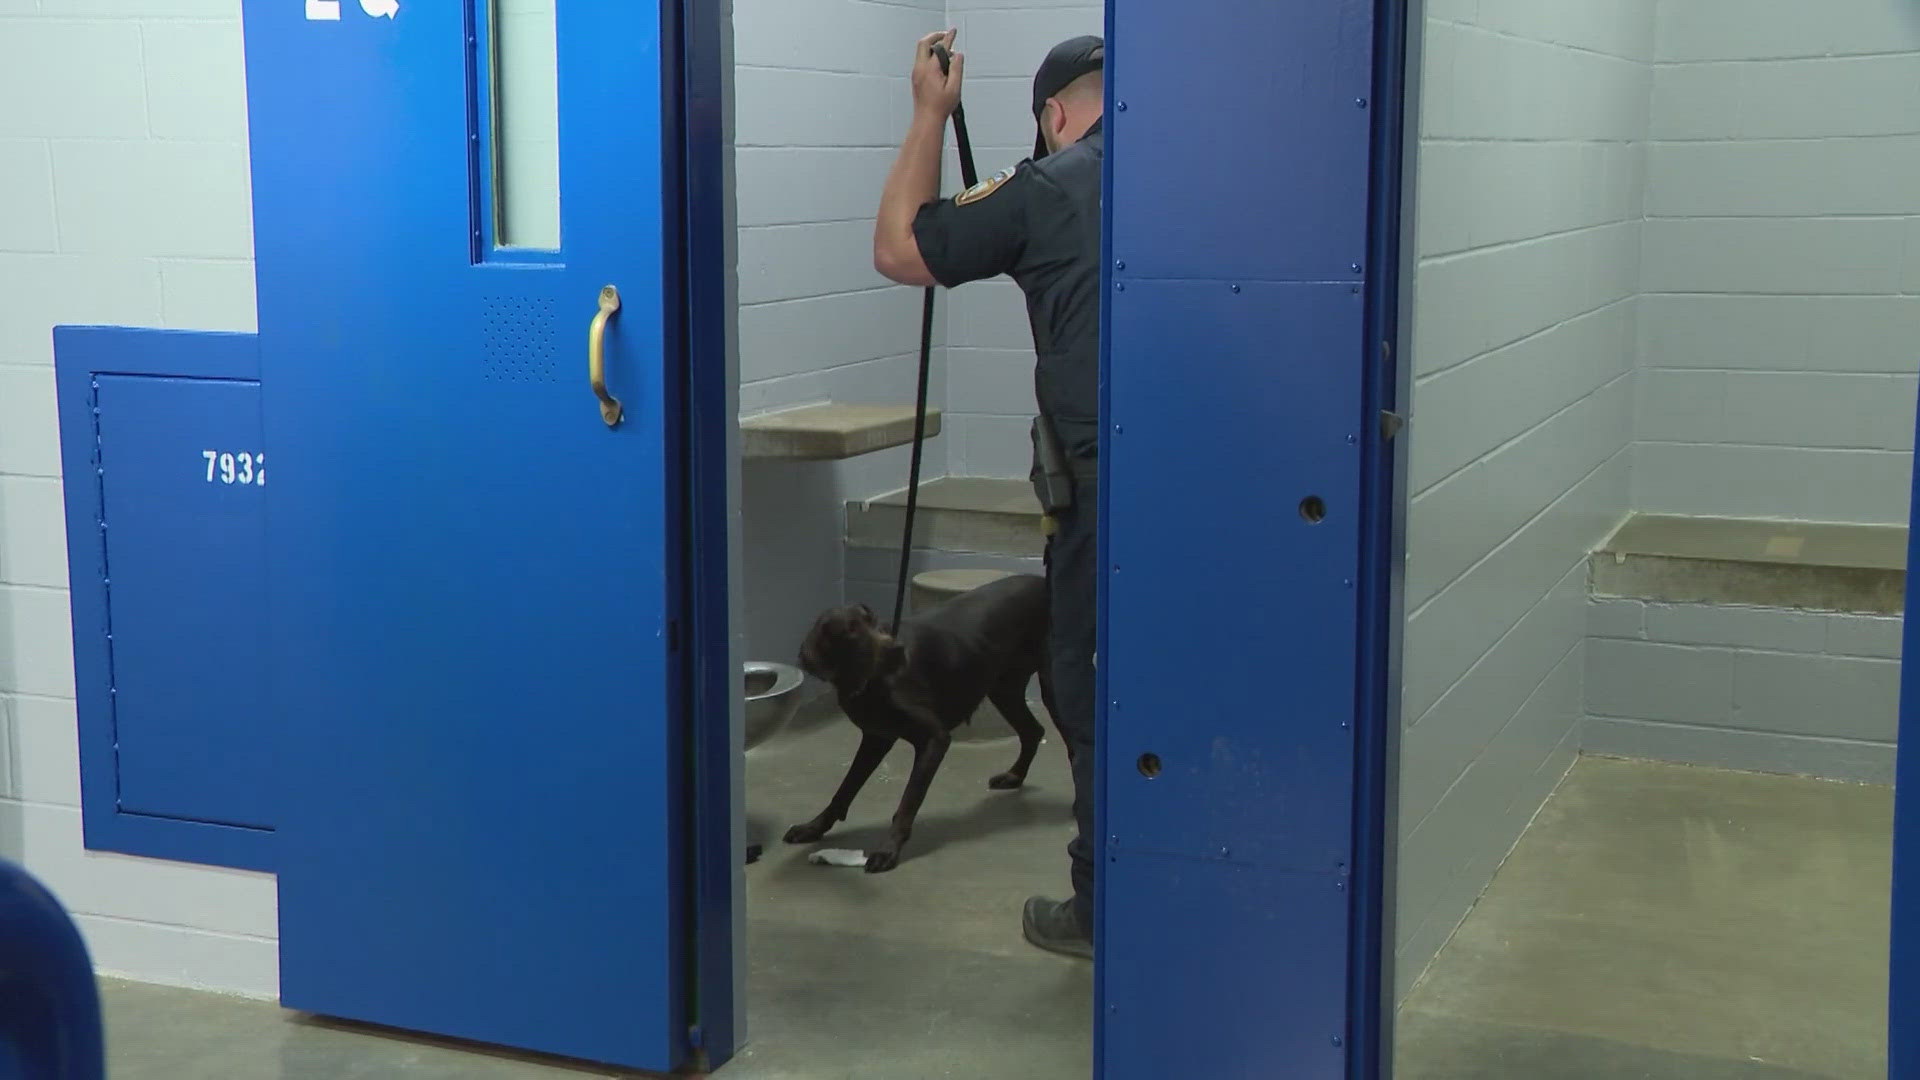 The new K9 unit works exclusively inside Harris County jail buildings, searching for drugs and other illegal contraband that's smuggled in.